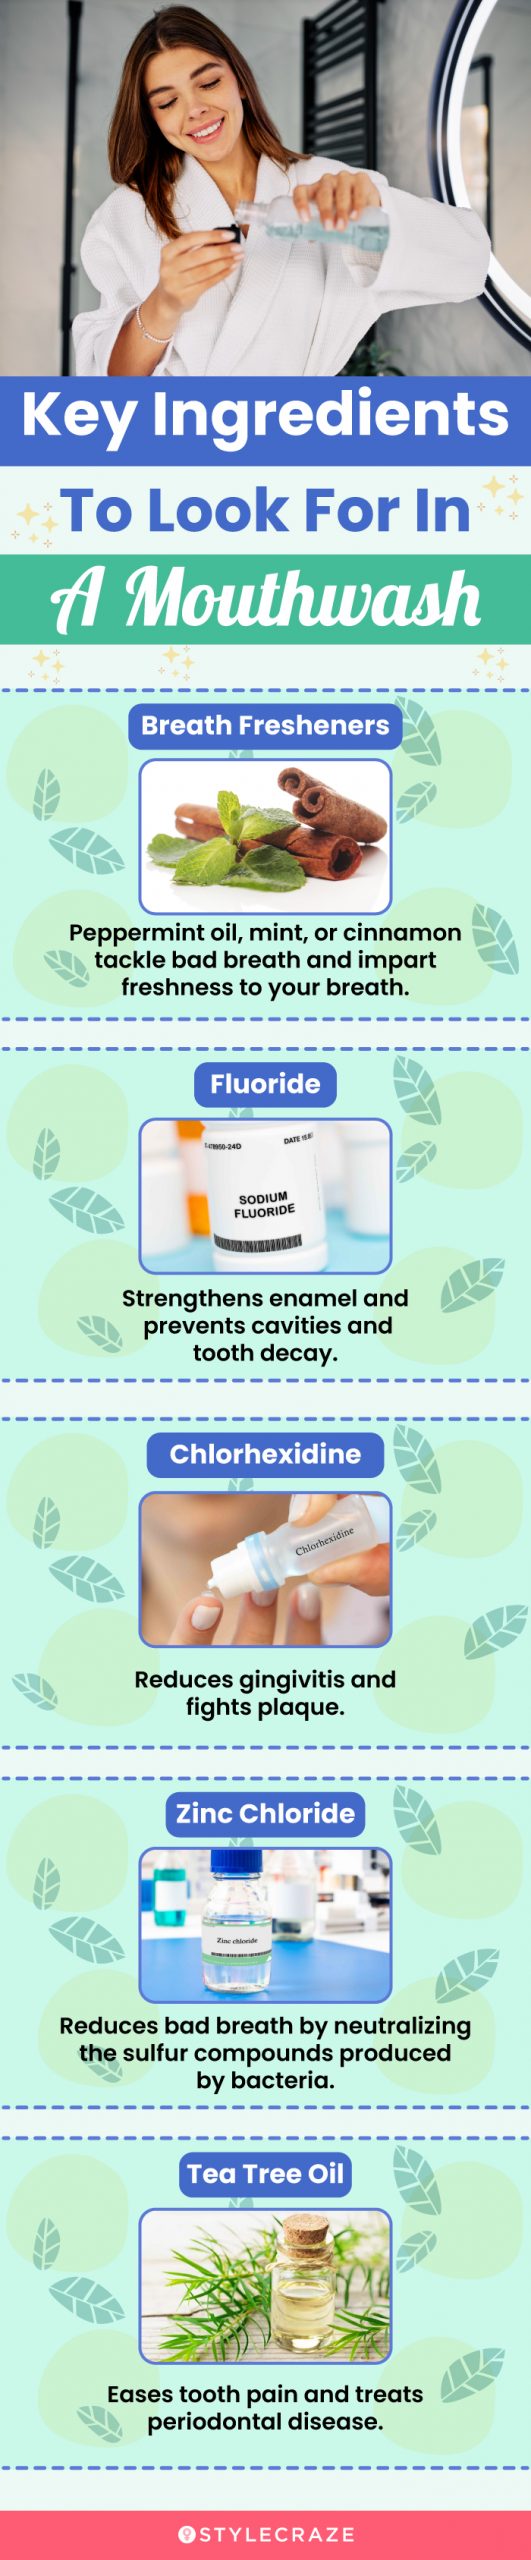 Key Ingredients to look for in a mouthwash (infographic)